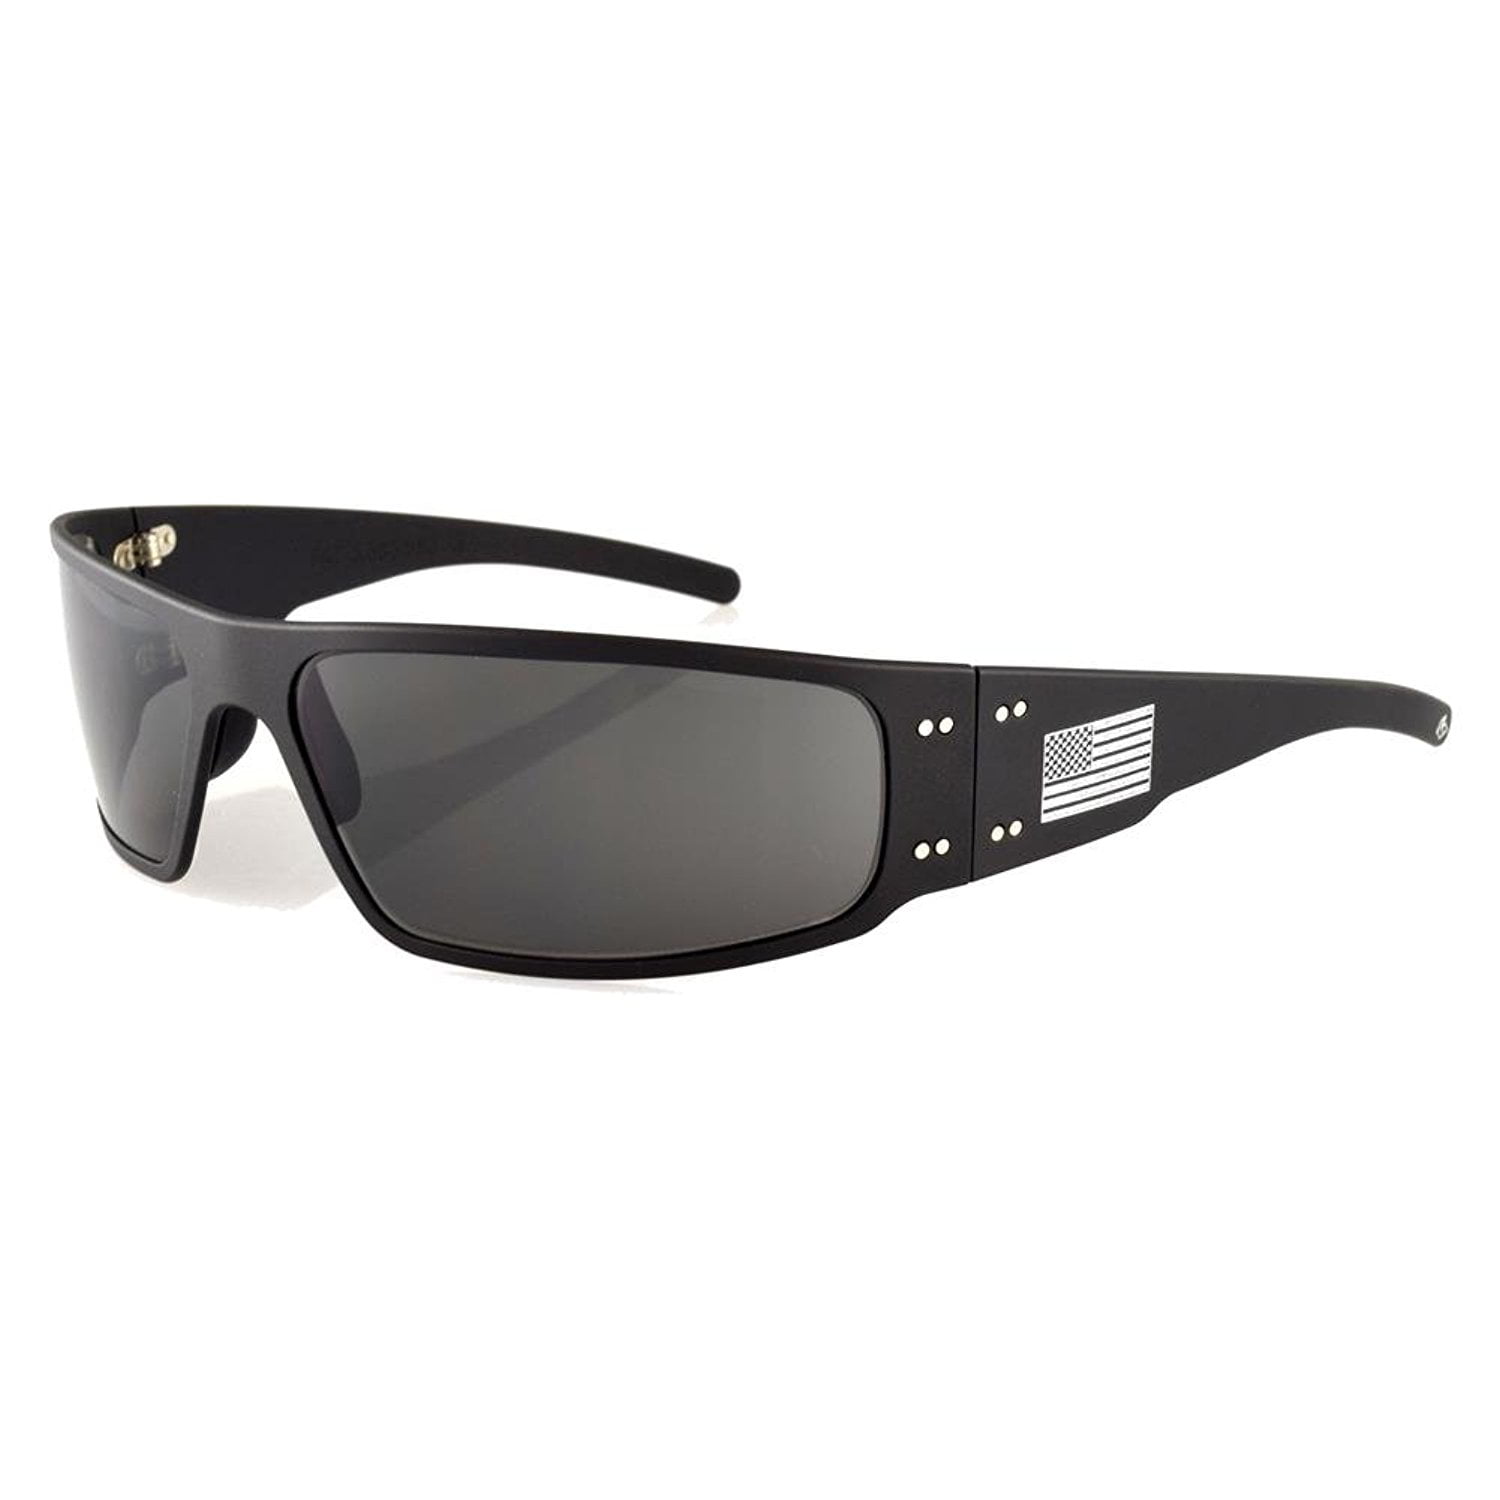 New Gatorz Magnum Sunglasses Black Grey and American Flag with ...